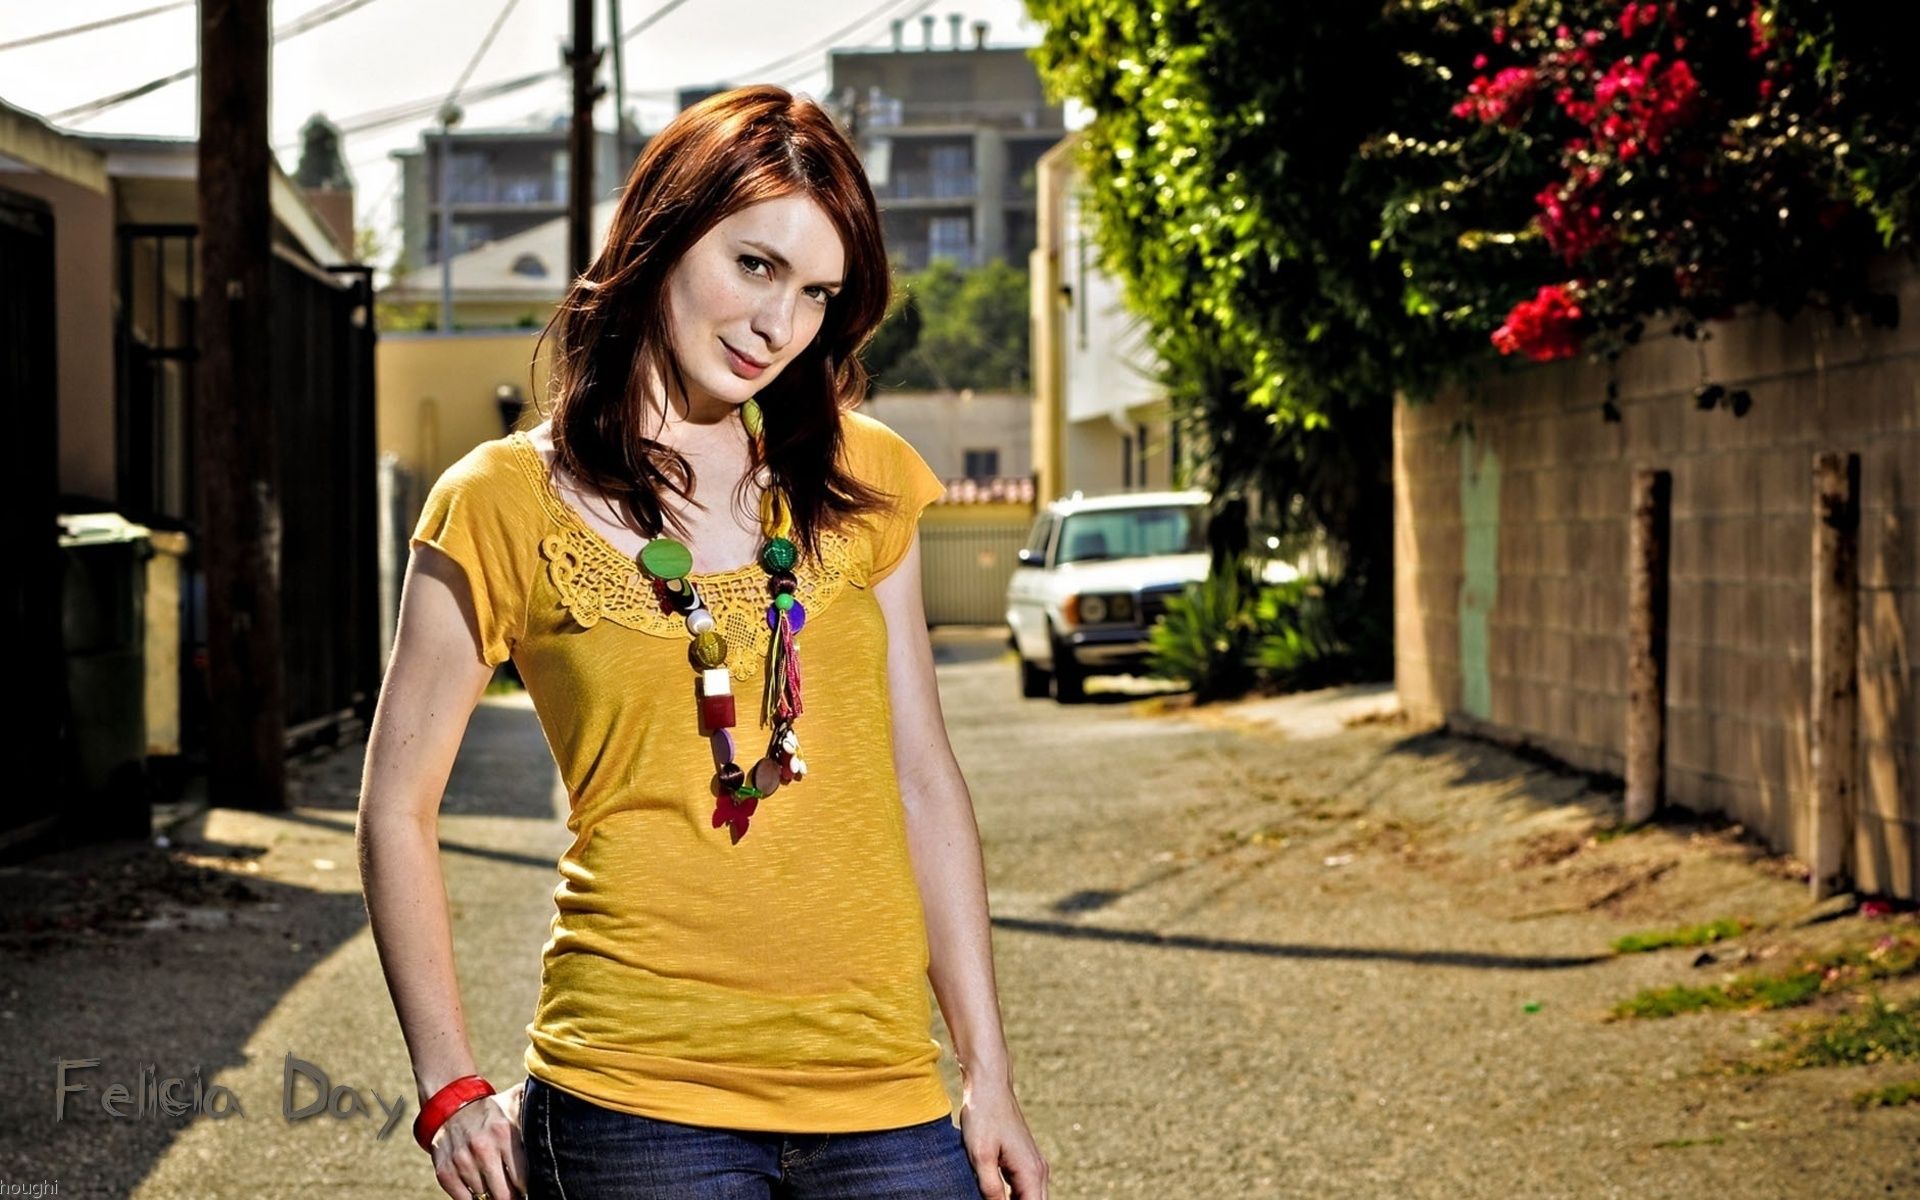 Felicia Day Wallpaper Release Date Specs Re Redesign And